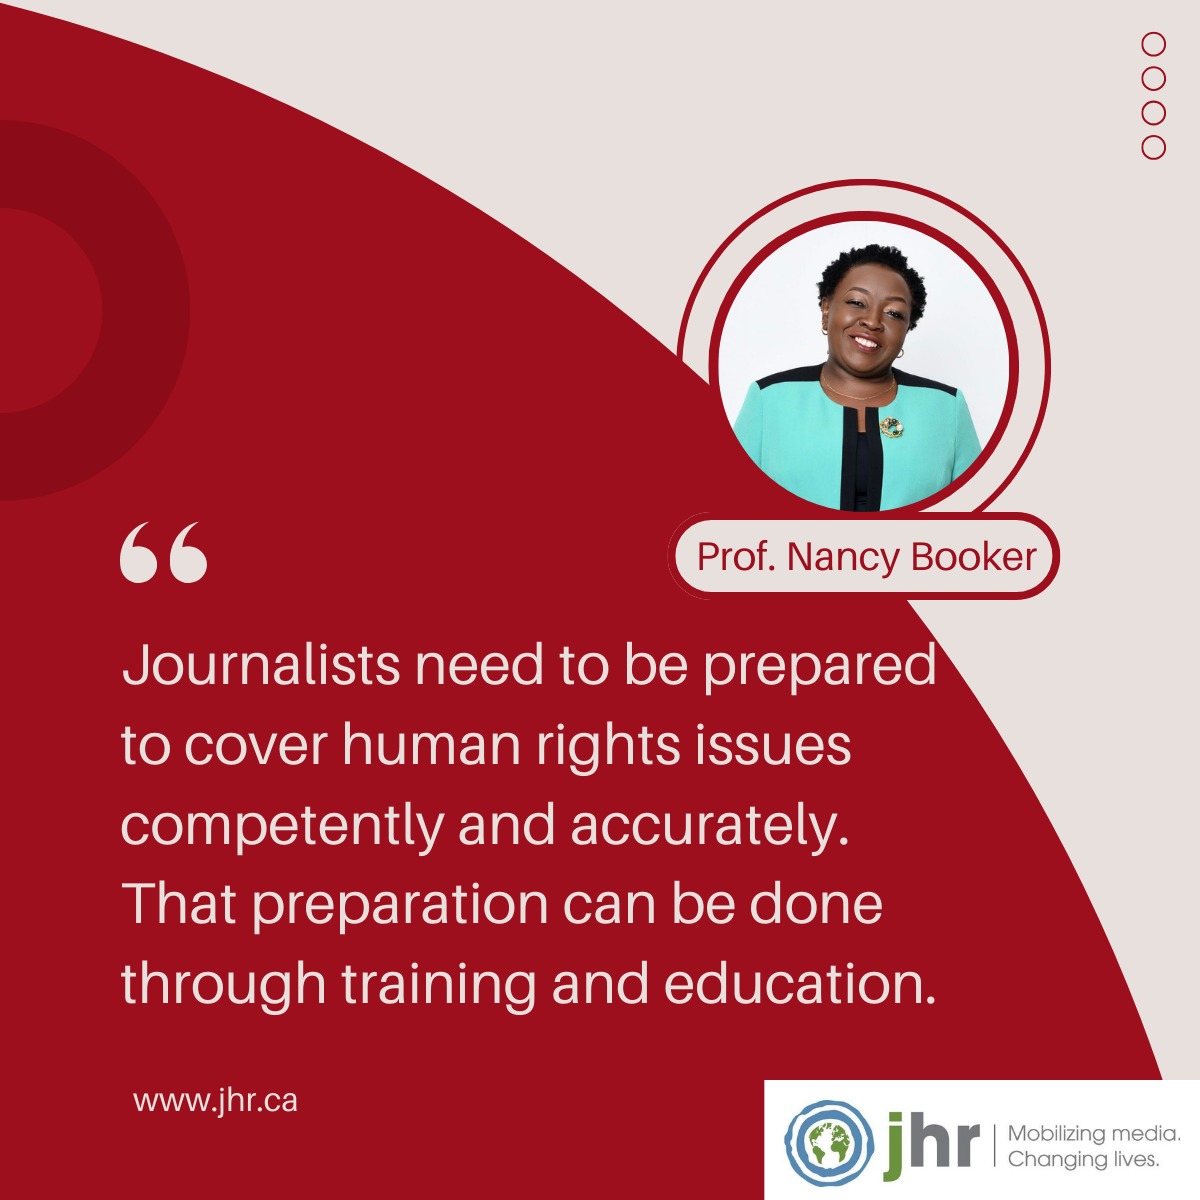 Preparing #journalists to skillfully and precisely cover #HumanRights issues is essential. @nabooker @jhrnews @mercymnjoroge @MustaphaDumbuya @MoiUniKenya